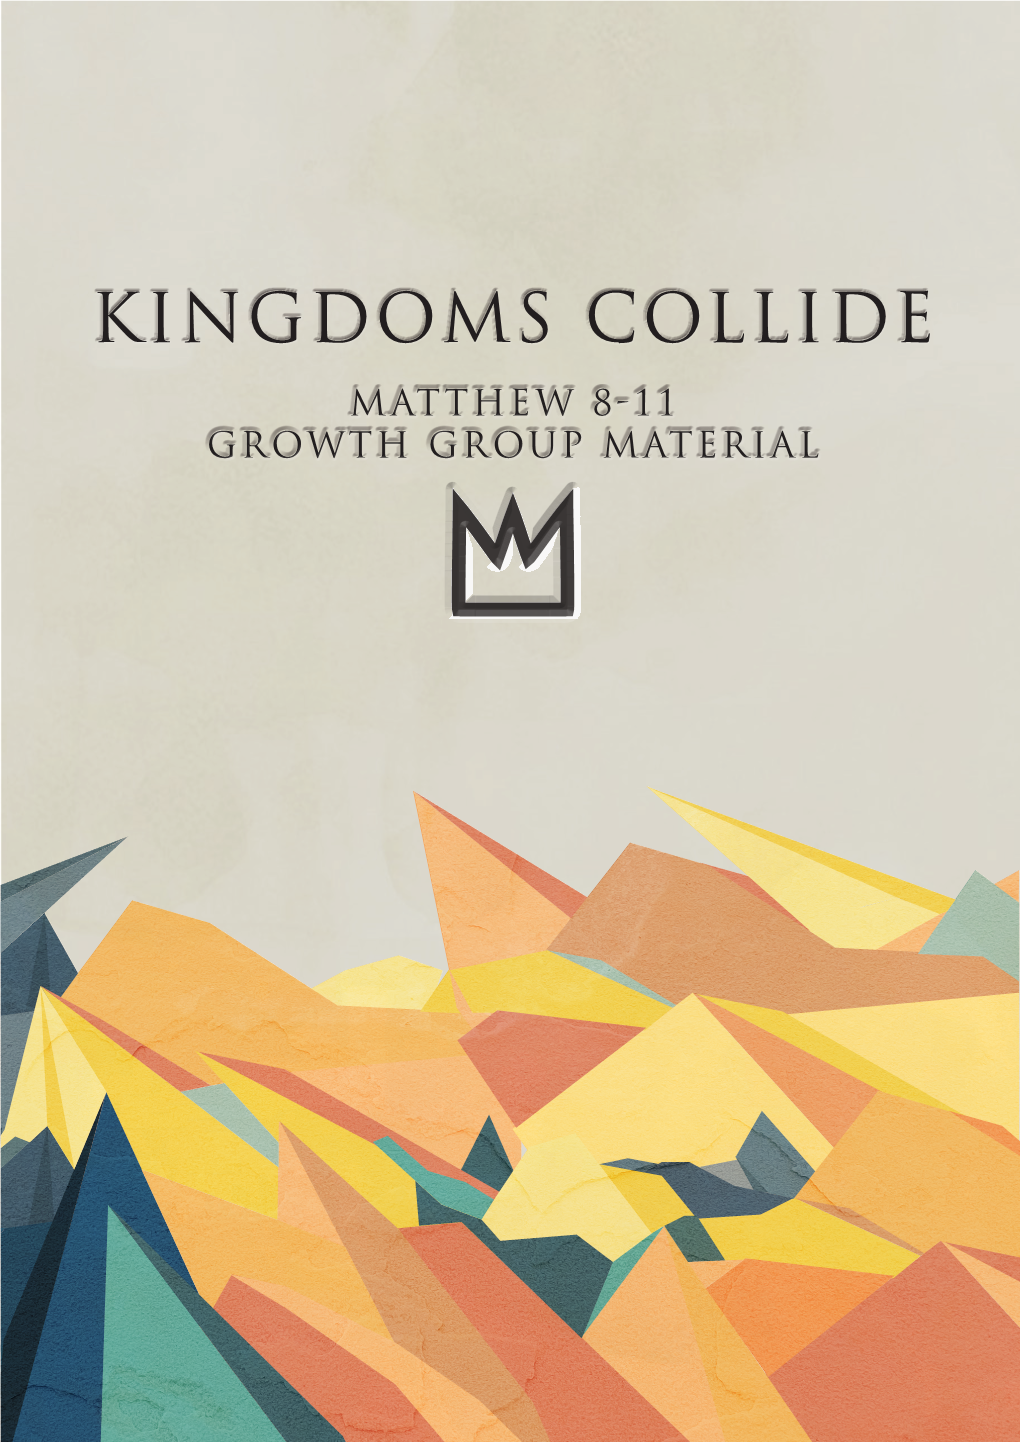 Kingdoms Collide Matthew 8-11 Growth Group Material